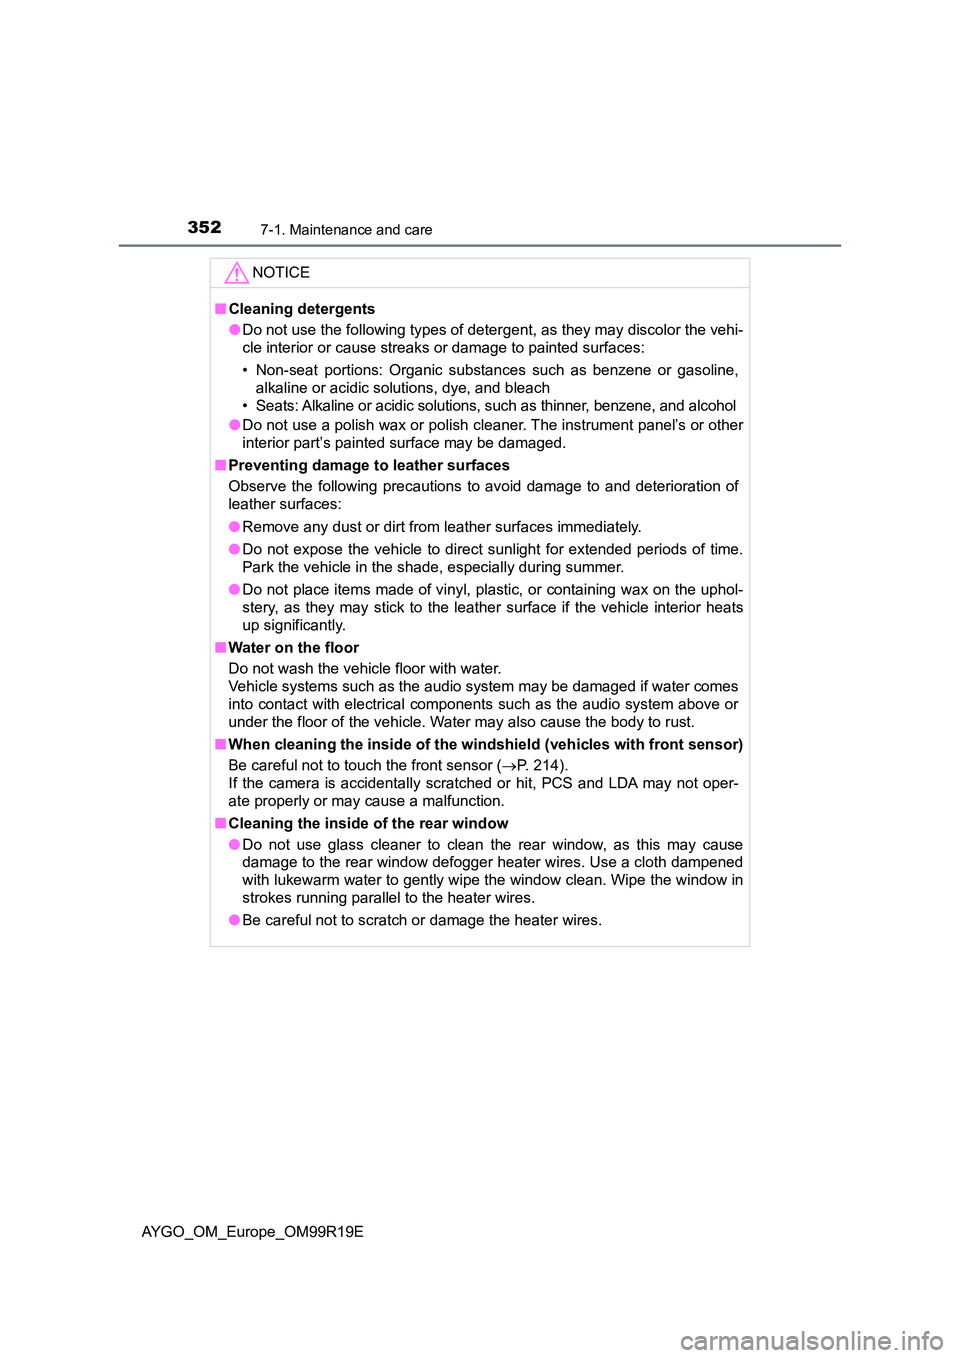 TOYOTA AYGO 2019  Owners Manual (in English) 3527-1. Maintenance and care
AYGO_OM_Europe_OM99R19E
NOTICE
■Cleaning detergents 
● Do not use the following types of detergent, as they may discolor the vehi- 
cle interior or cause streaks or da